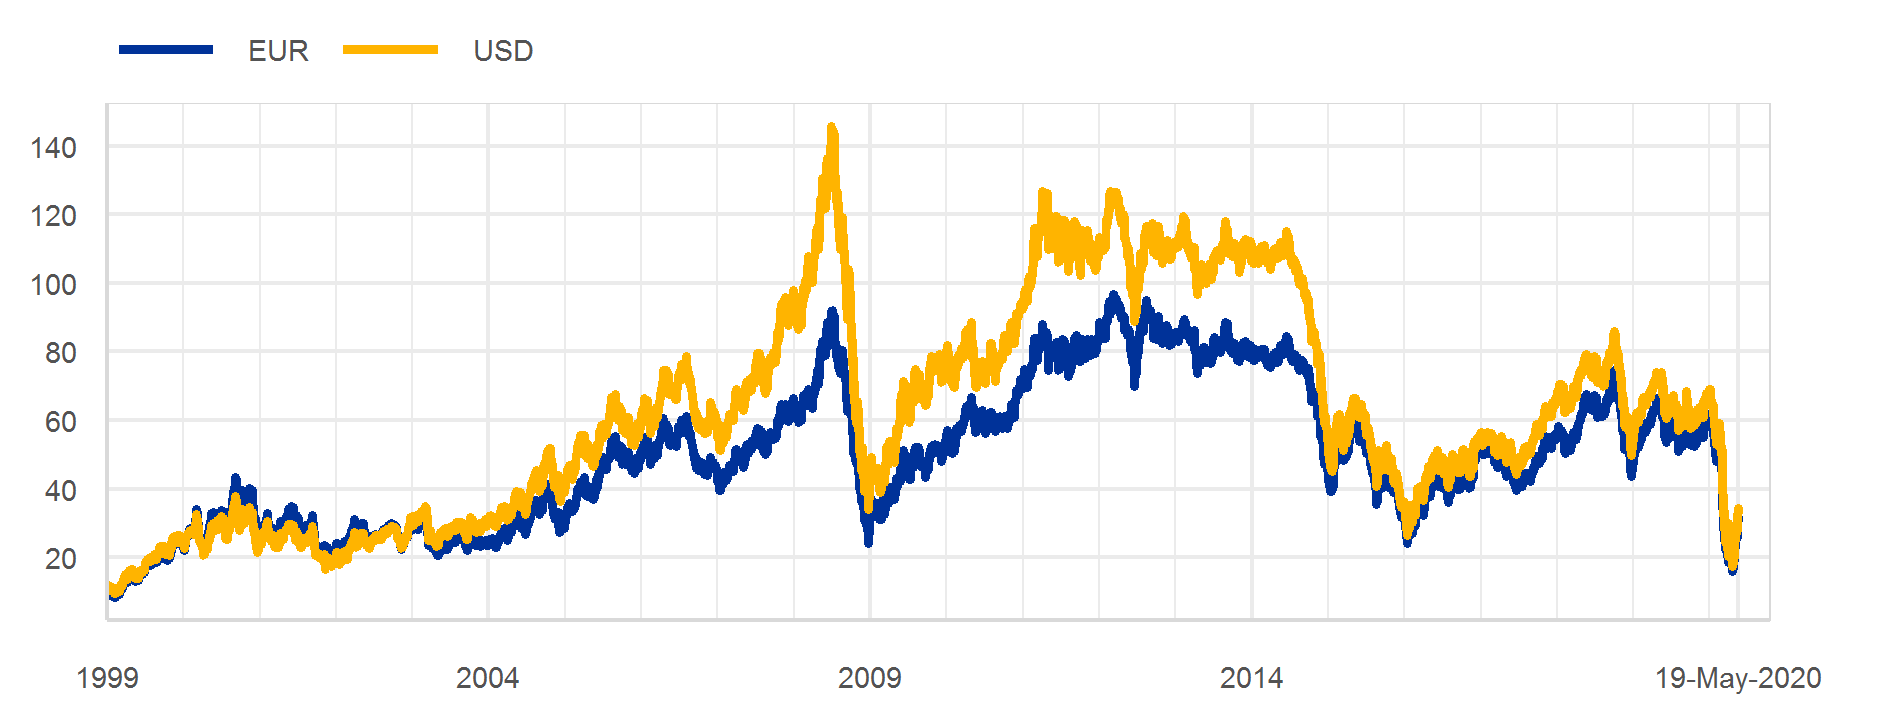 C:\Users\osbatch\Downloads\00.tmp speech pics\Oil prices in US dollar and in euro.png